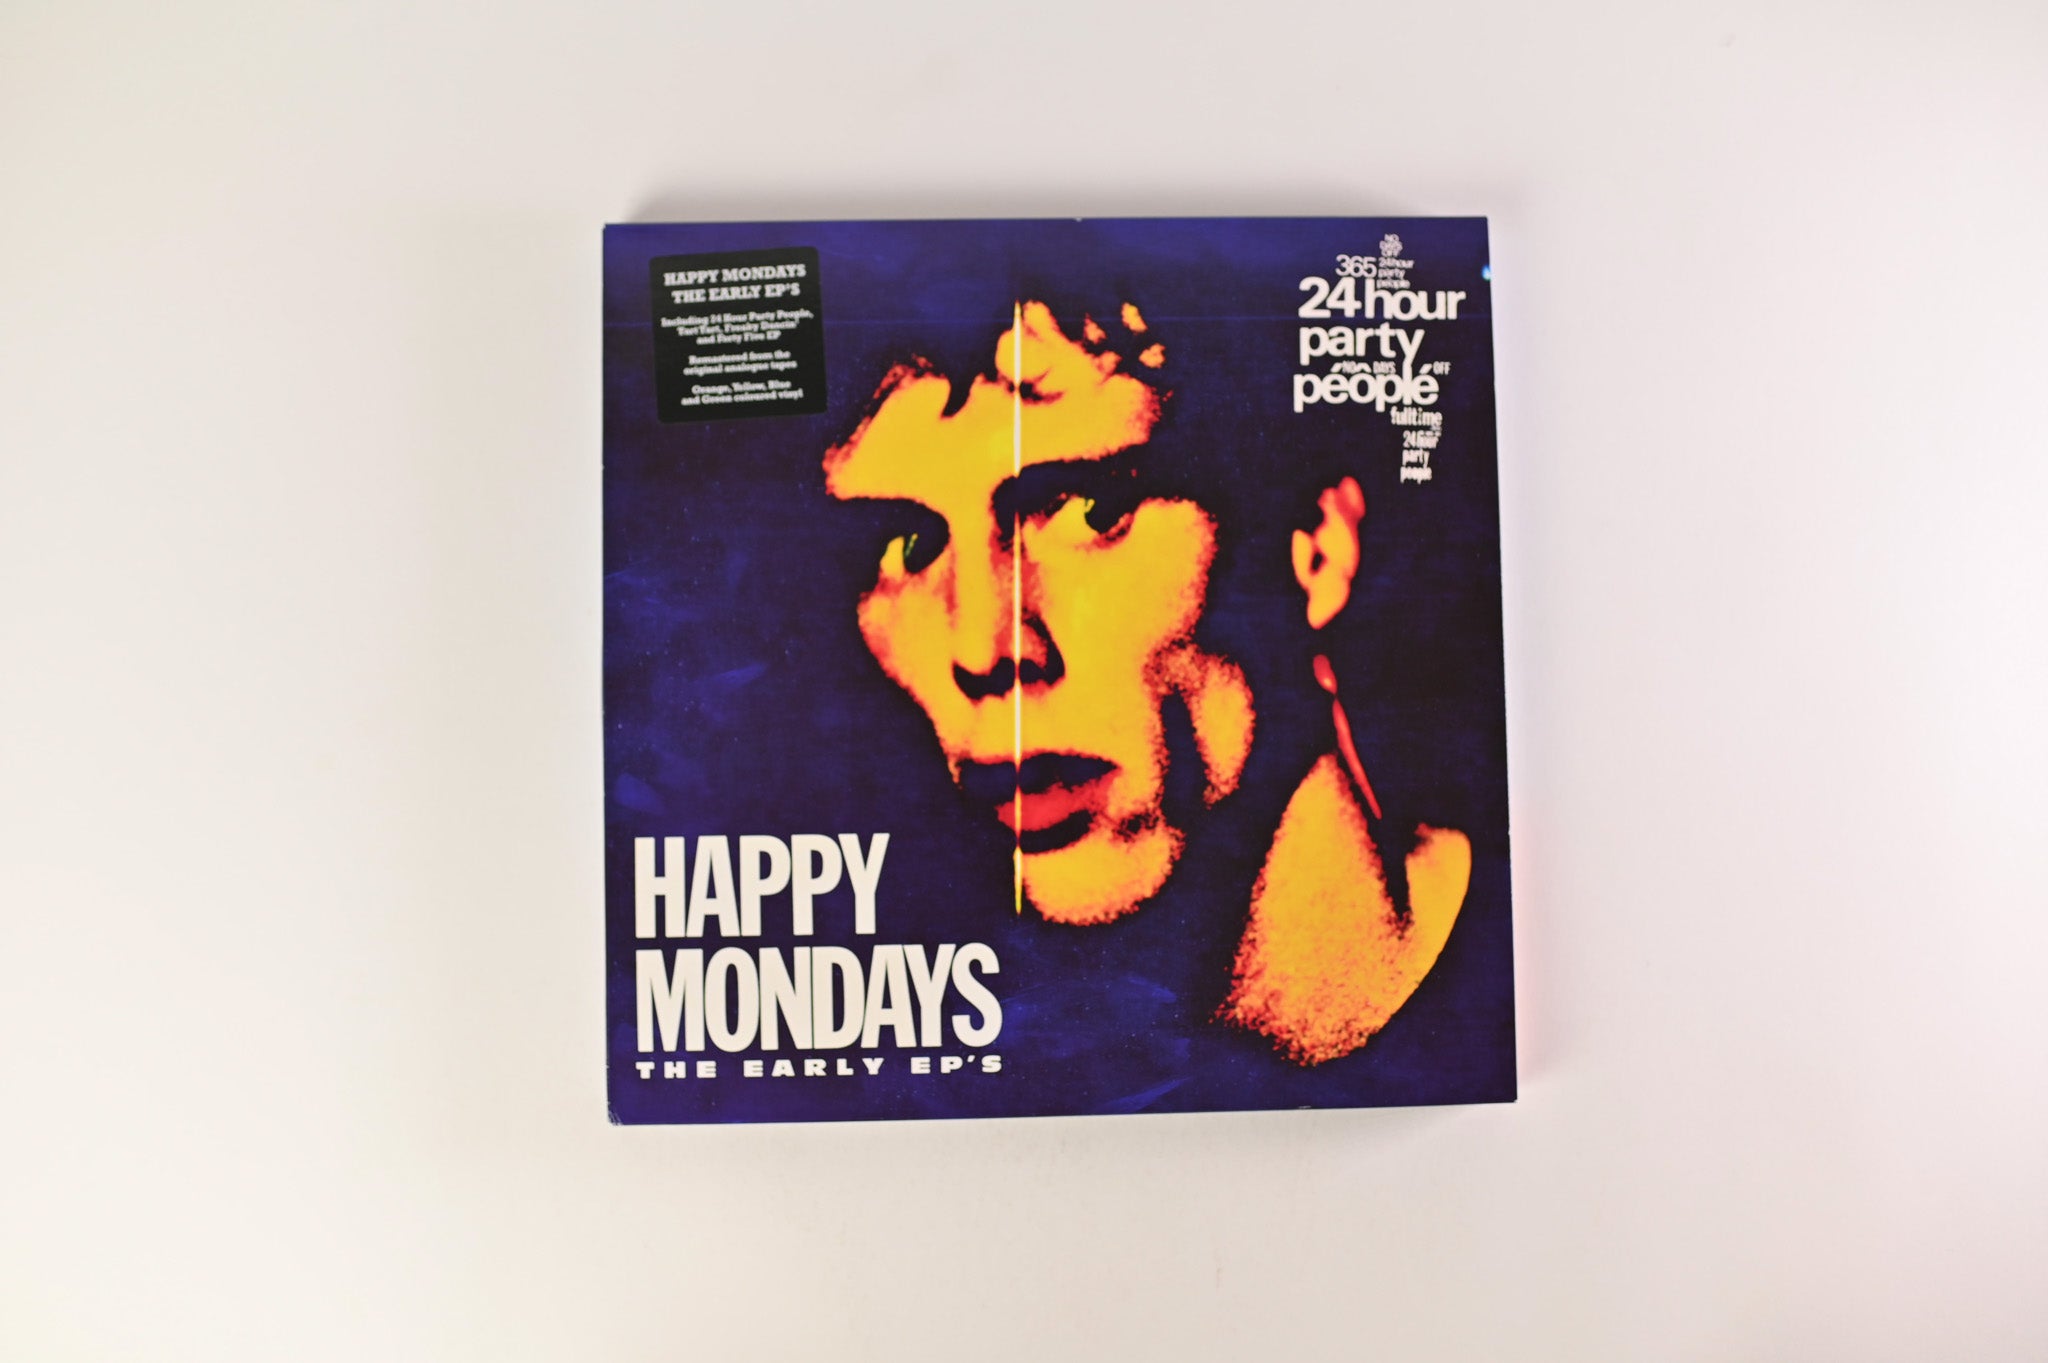 Happy Mondays - The Early EP's on London Colored Vinyl Box Set